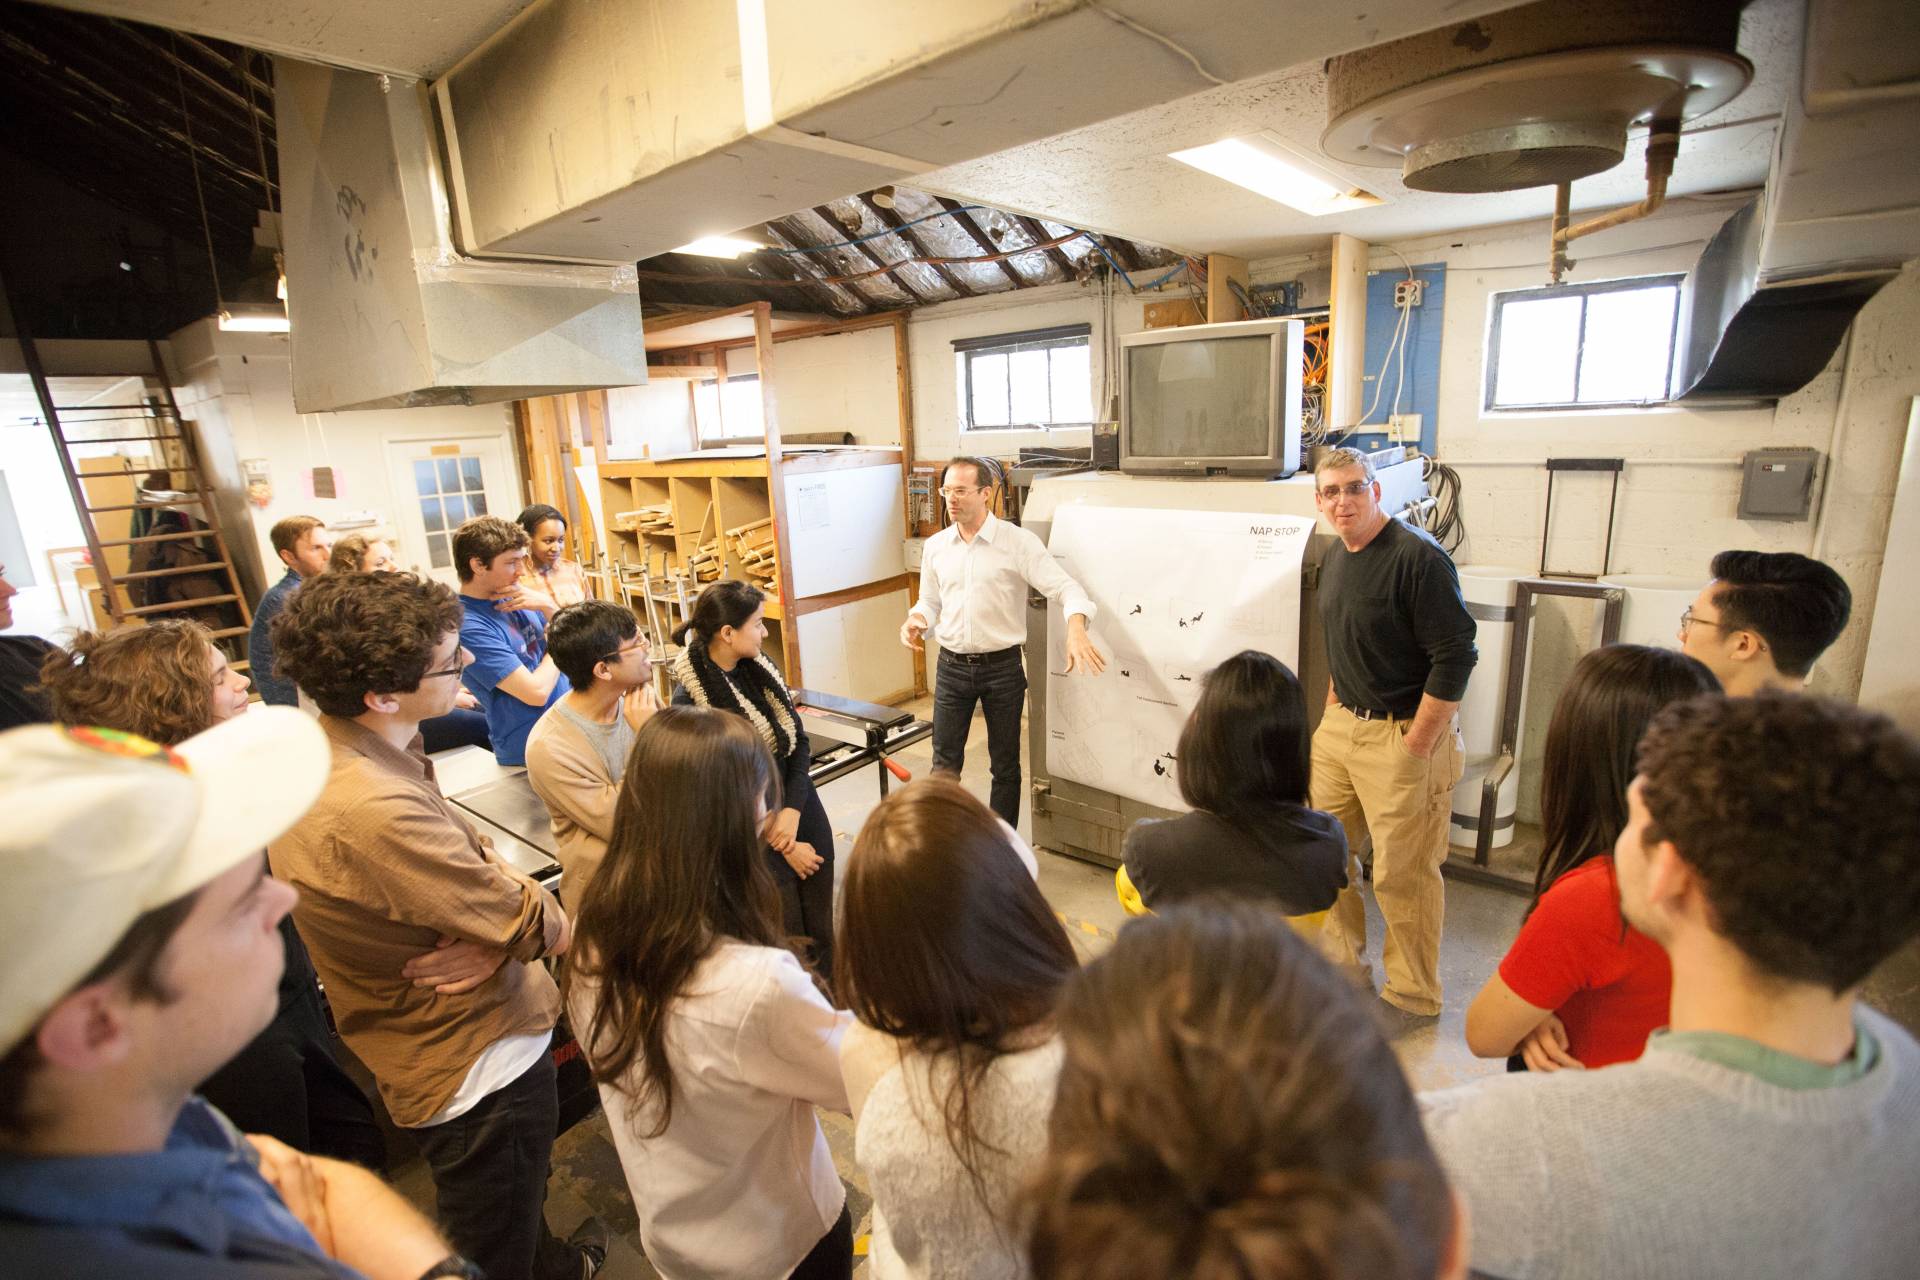 A class is held in an architecture workshop, with students huddled around two professors.